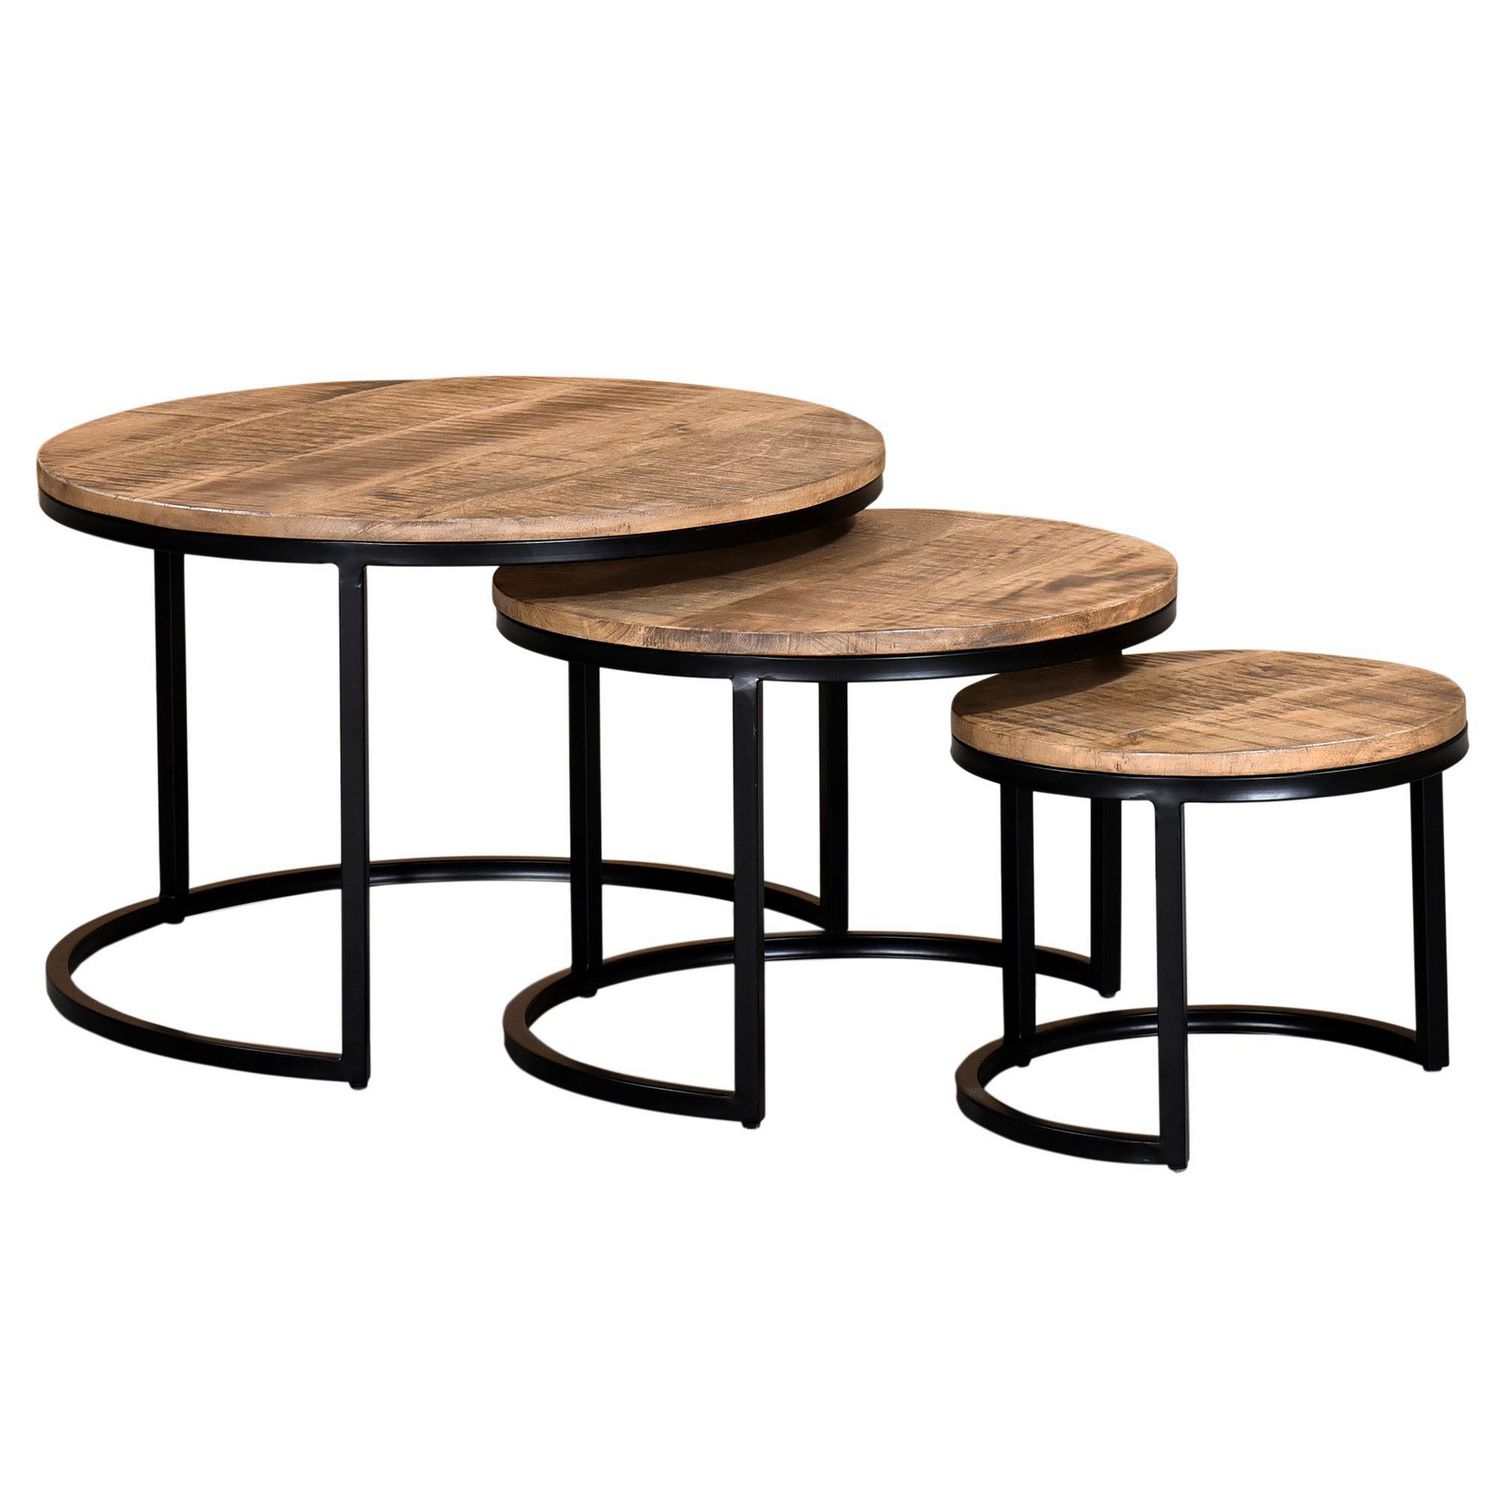 Rustic Modern Solid Wood Metal 3pc, Rustic Round Coffee Table Canada